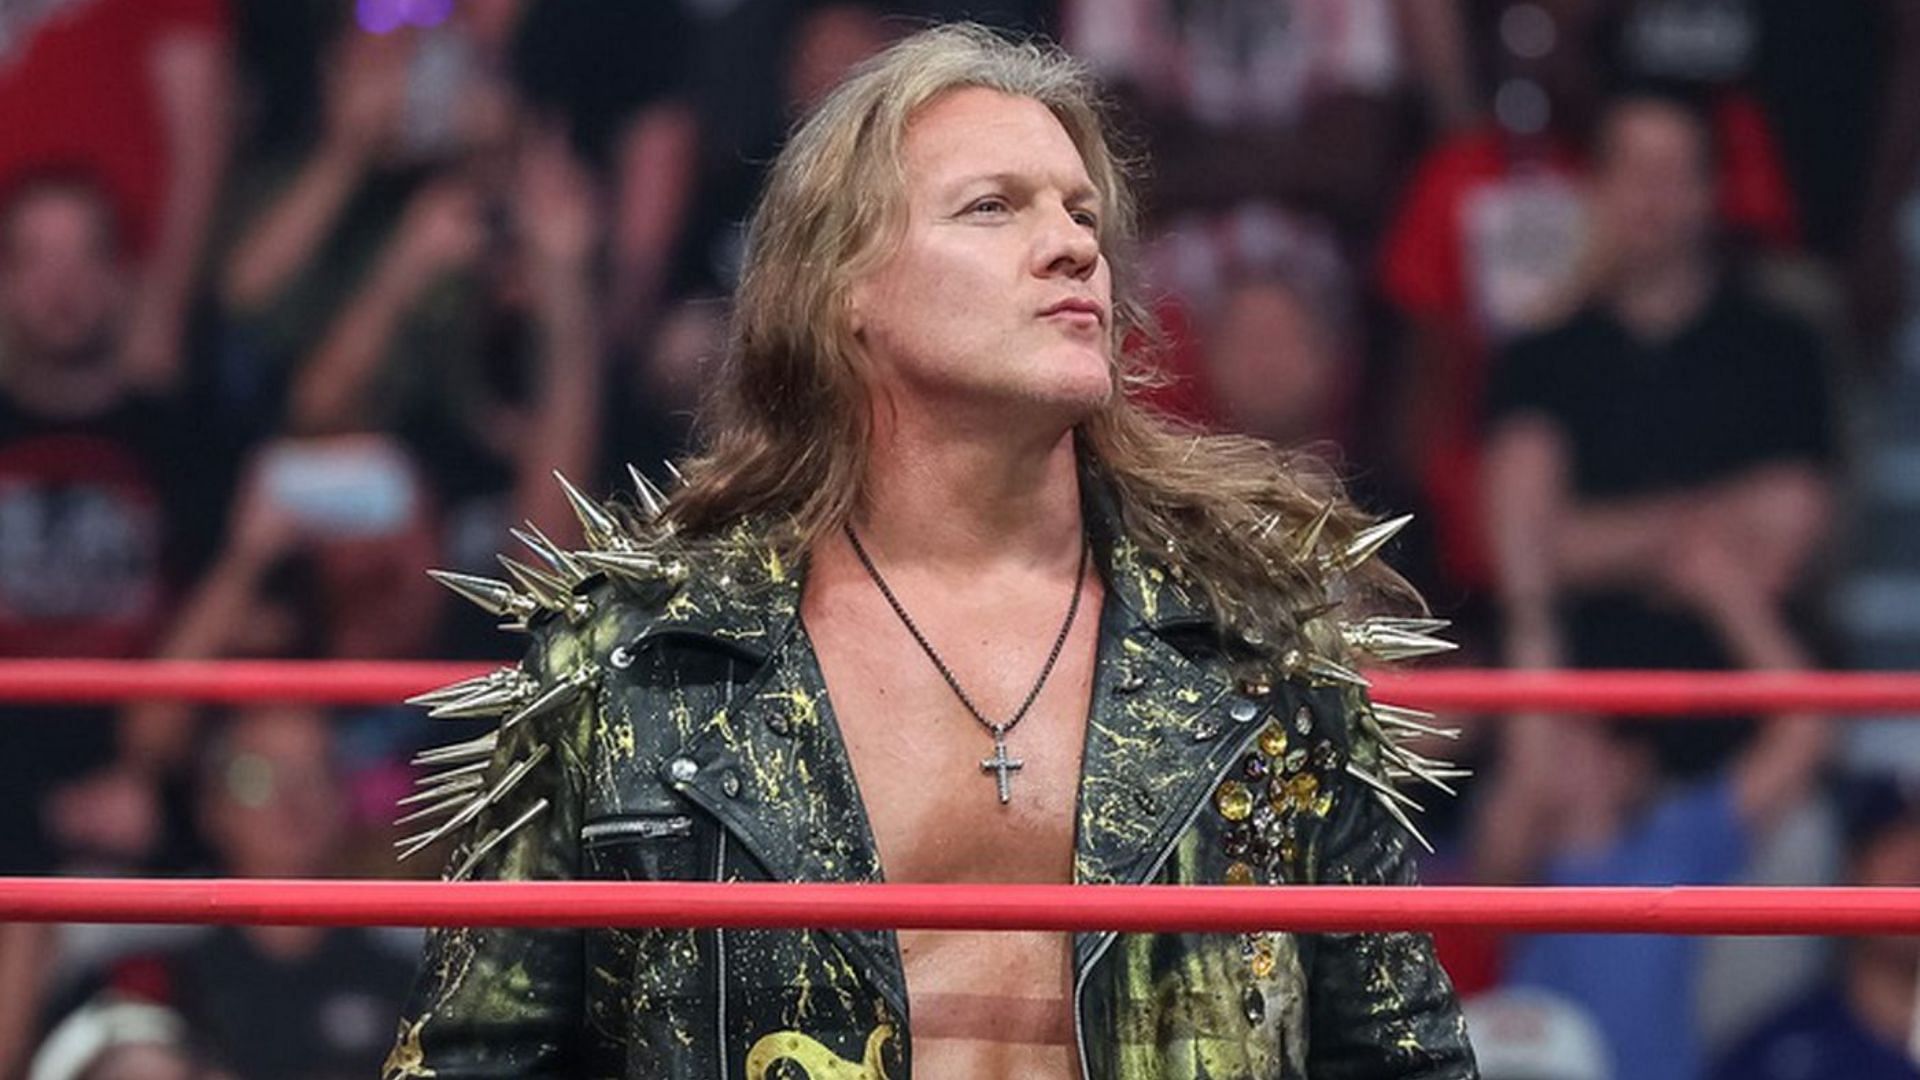 Could Jericho still end up wrestling this veteran at a later stage?